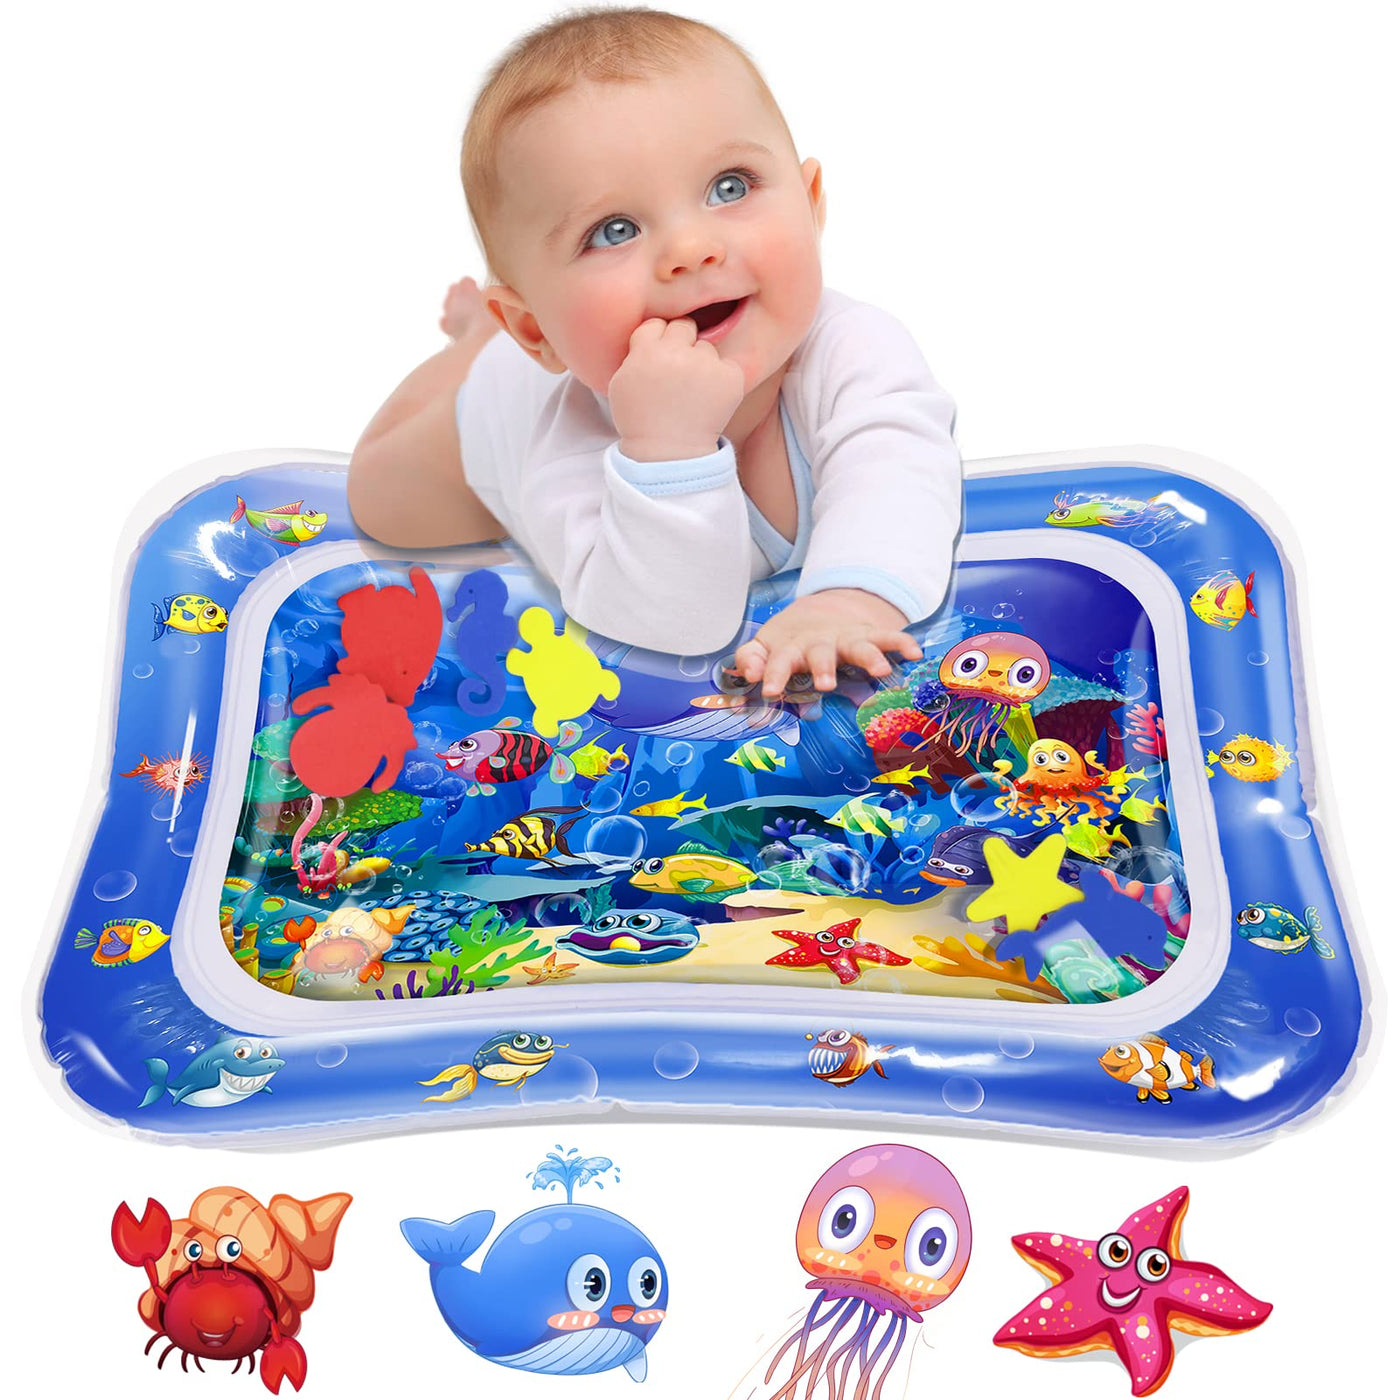 Olivia Cold & Warm Water Tummy Time Mat - 🎉 Buy 1 Get 1 Free